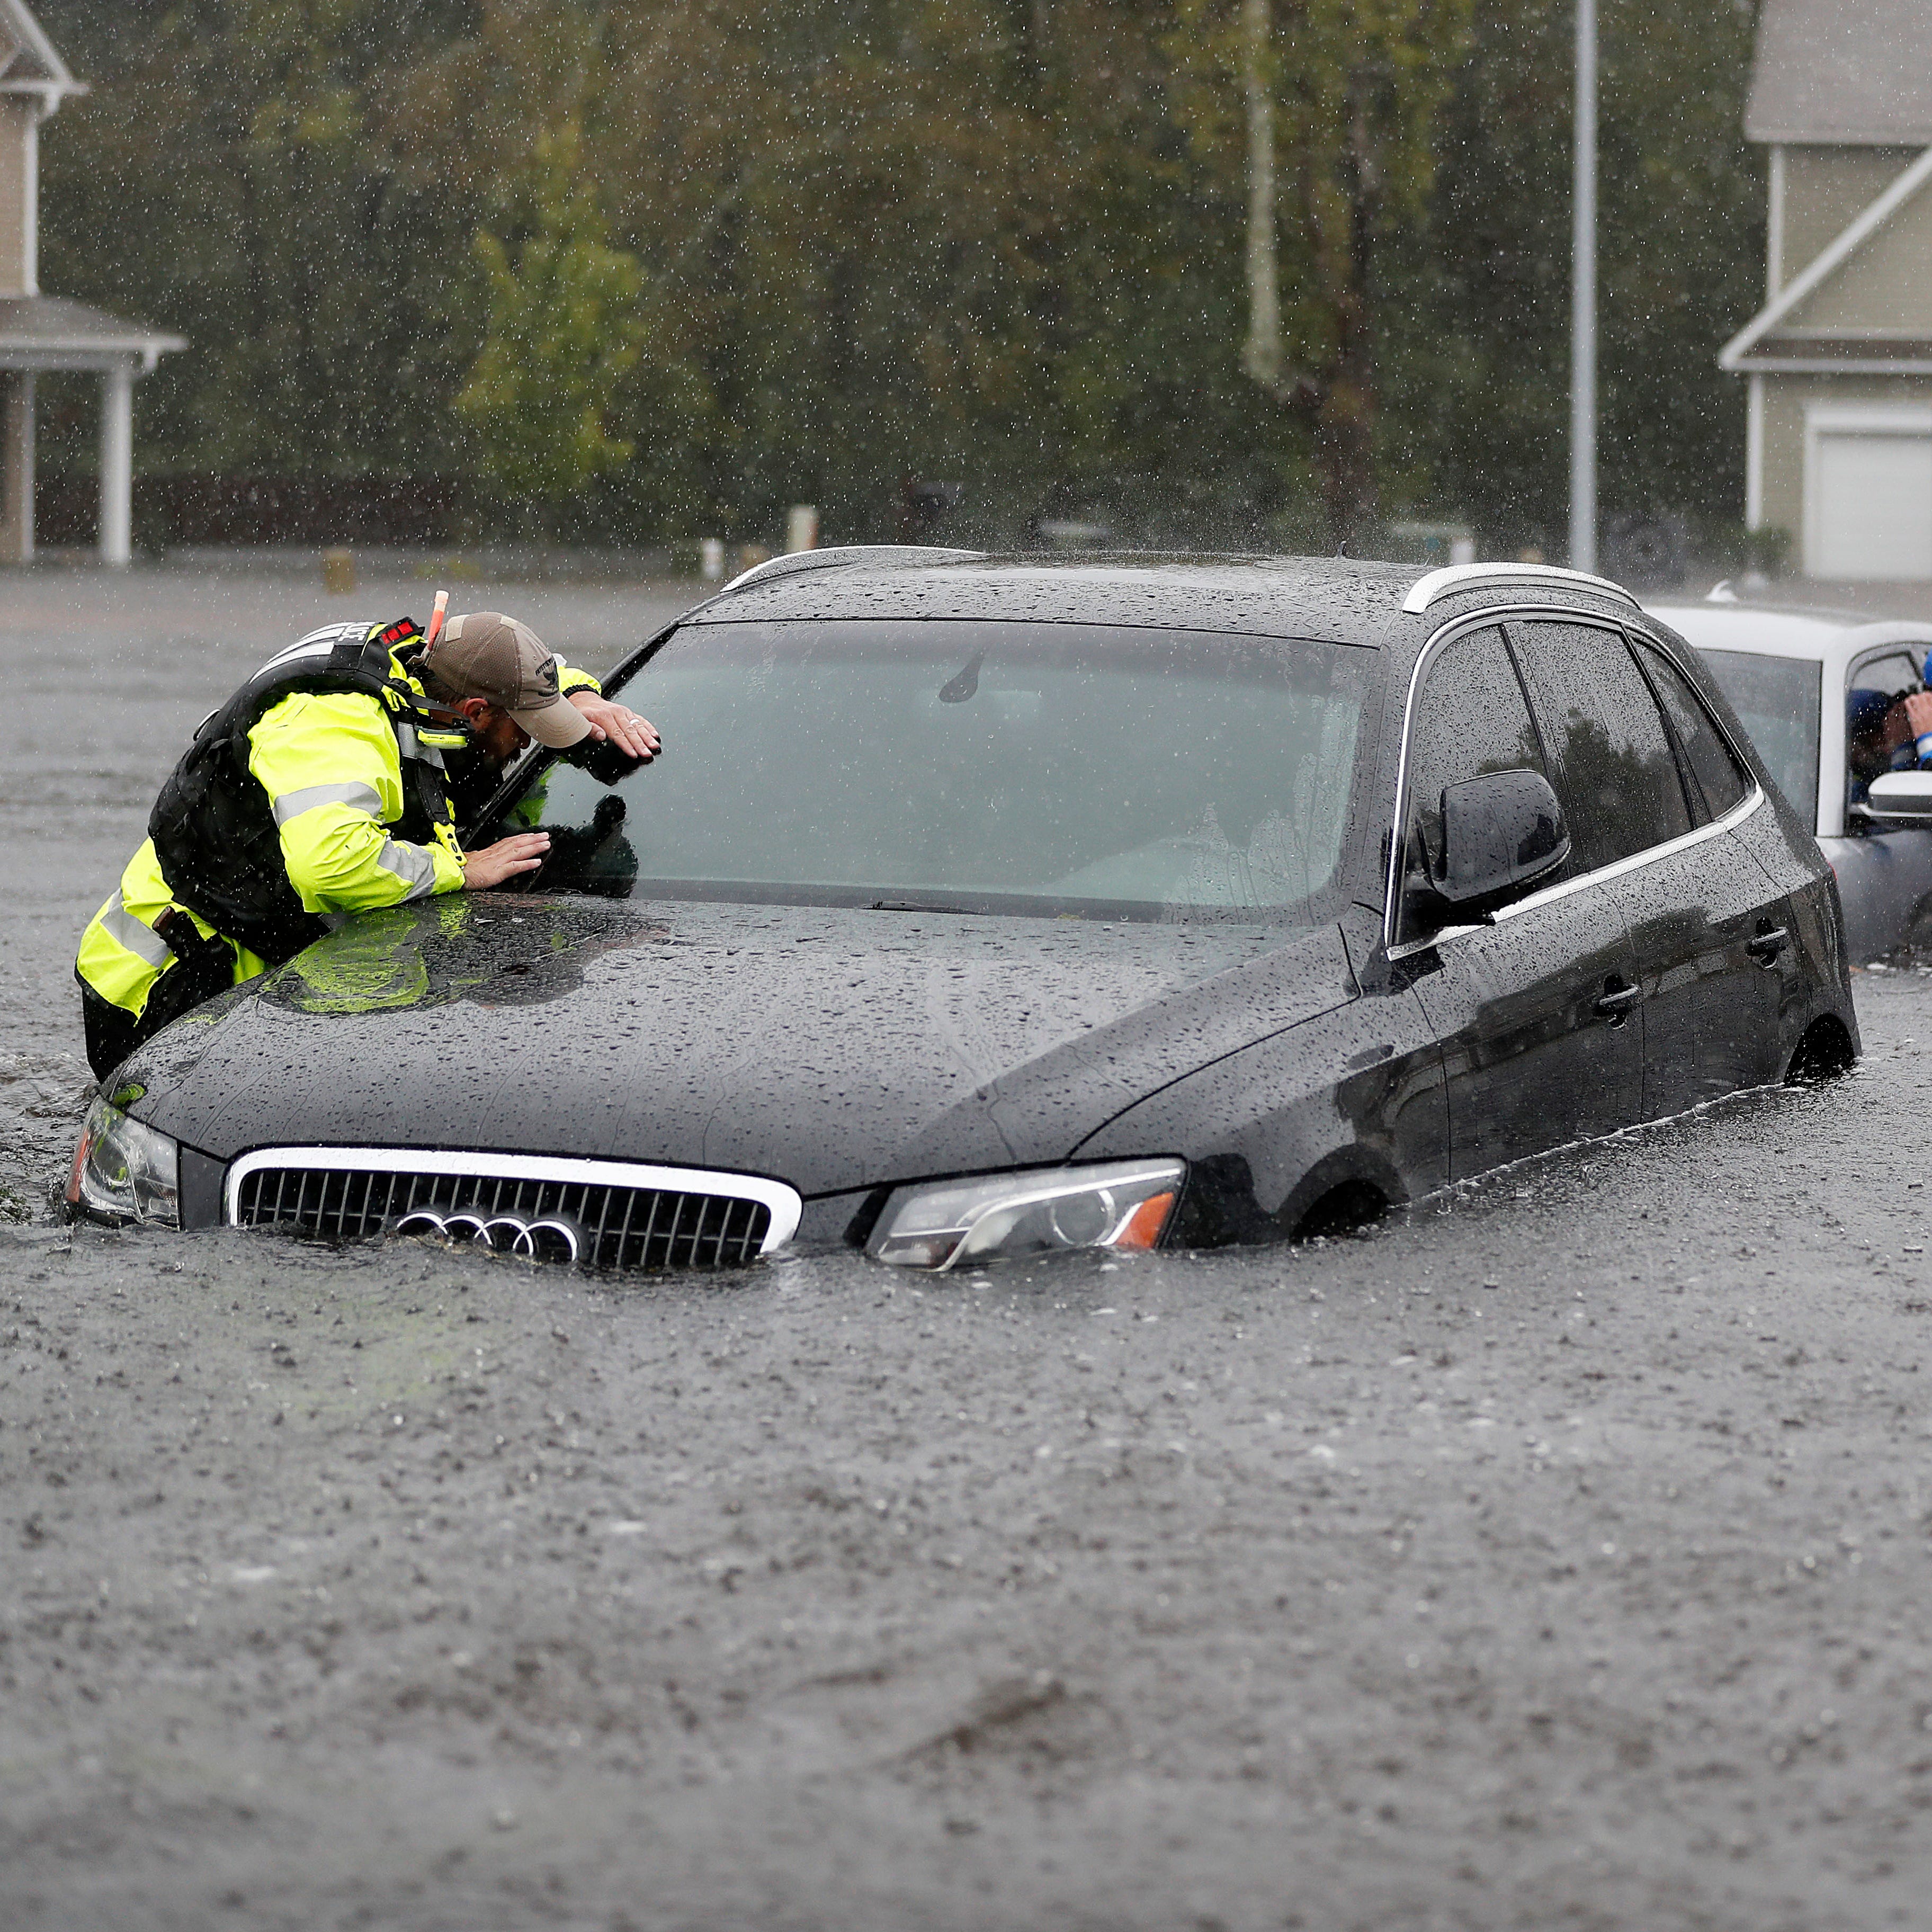 Members of the North Carolina Task Force urban search and rescue team check cars in a flooded neighborhood looking for residents who stayed behind as Florence continues to dump heavy rain in Fayetteville, N.C. on Sept. 16, 2018.